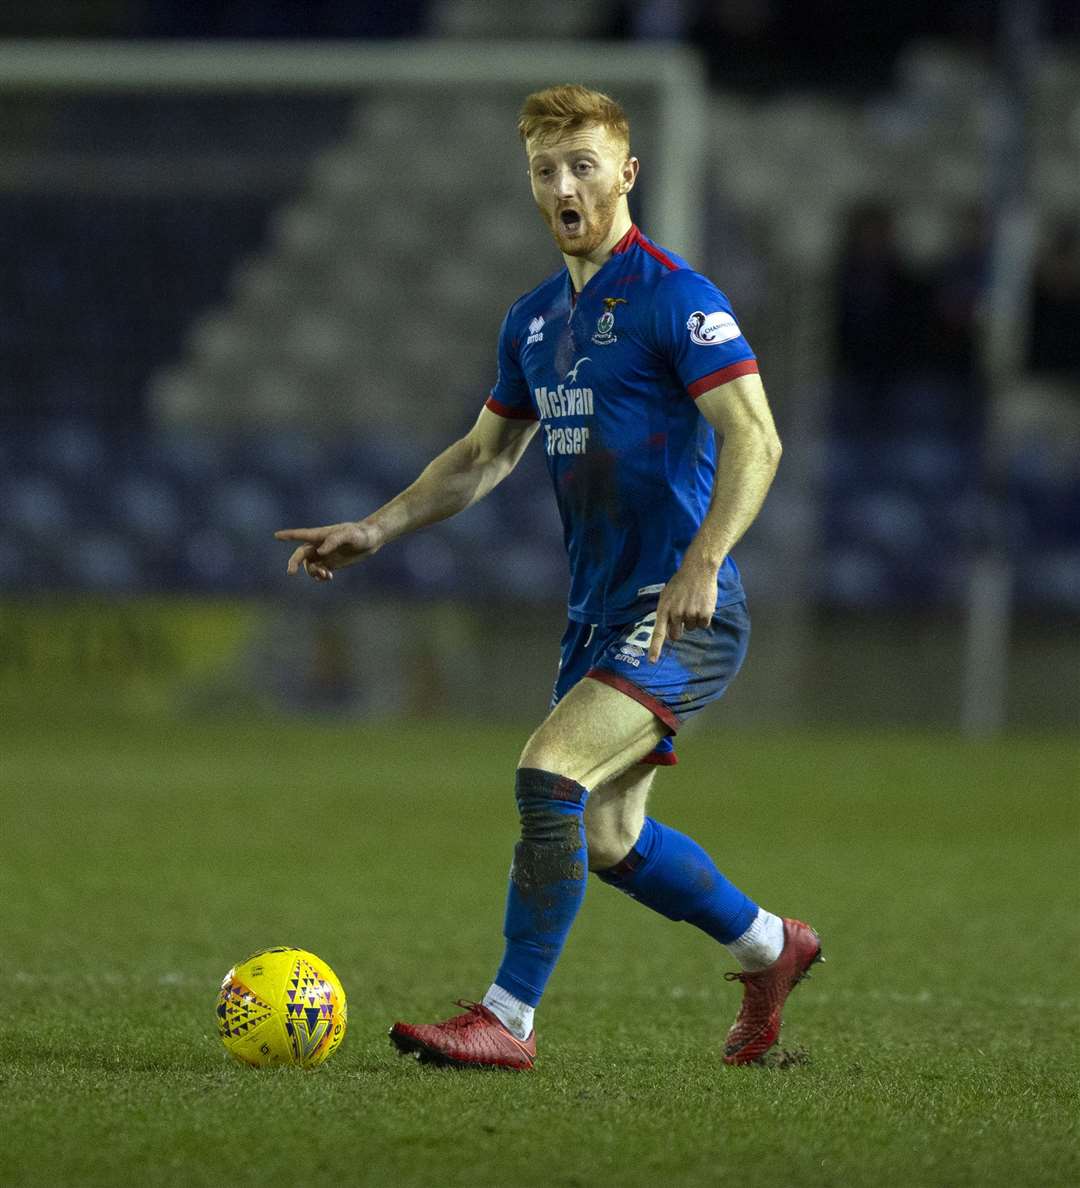 David Carson is one of several players yet to feature for Inverness this season.